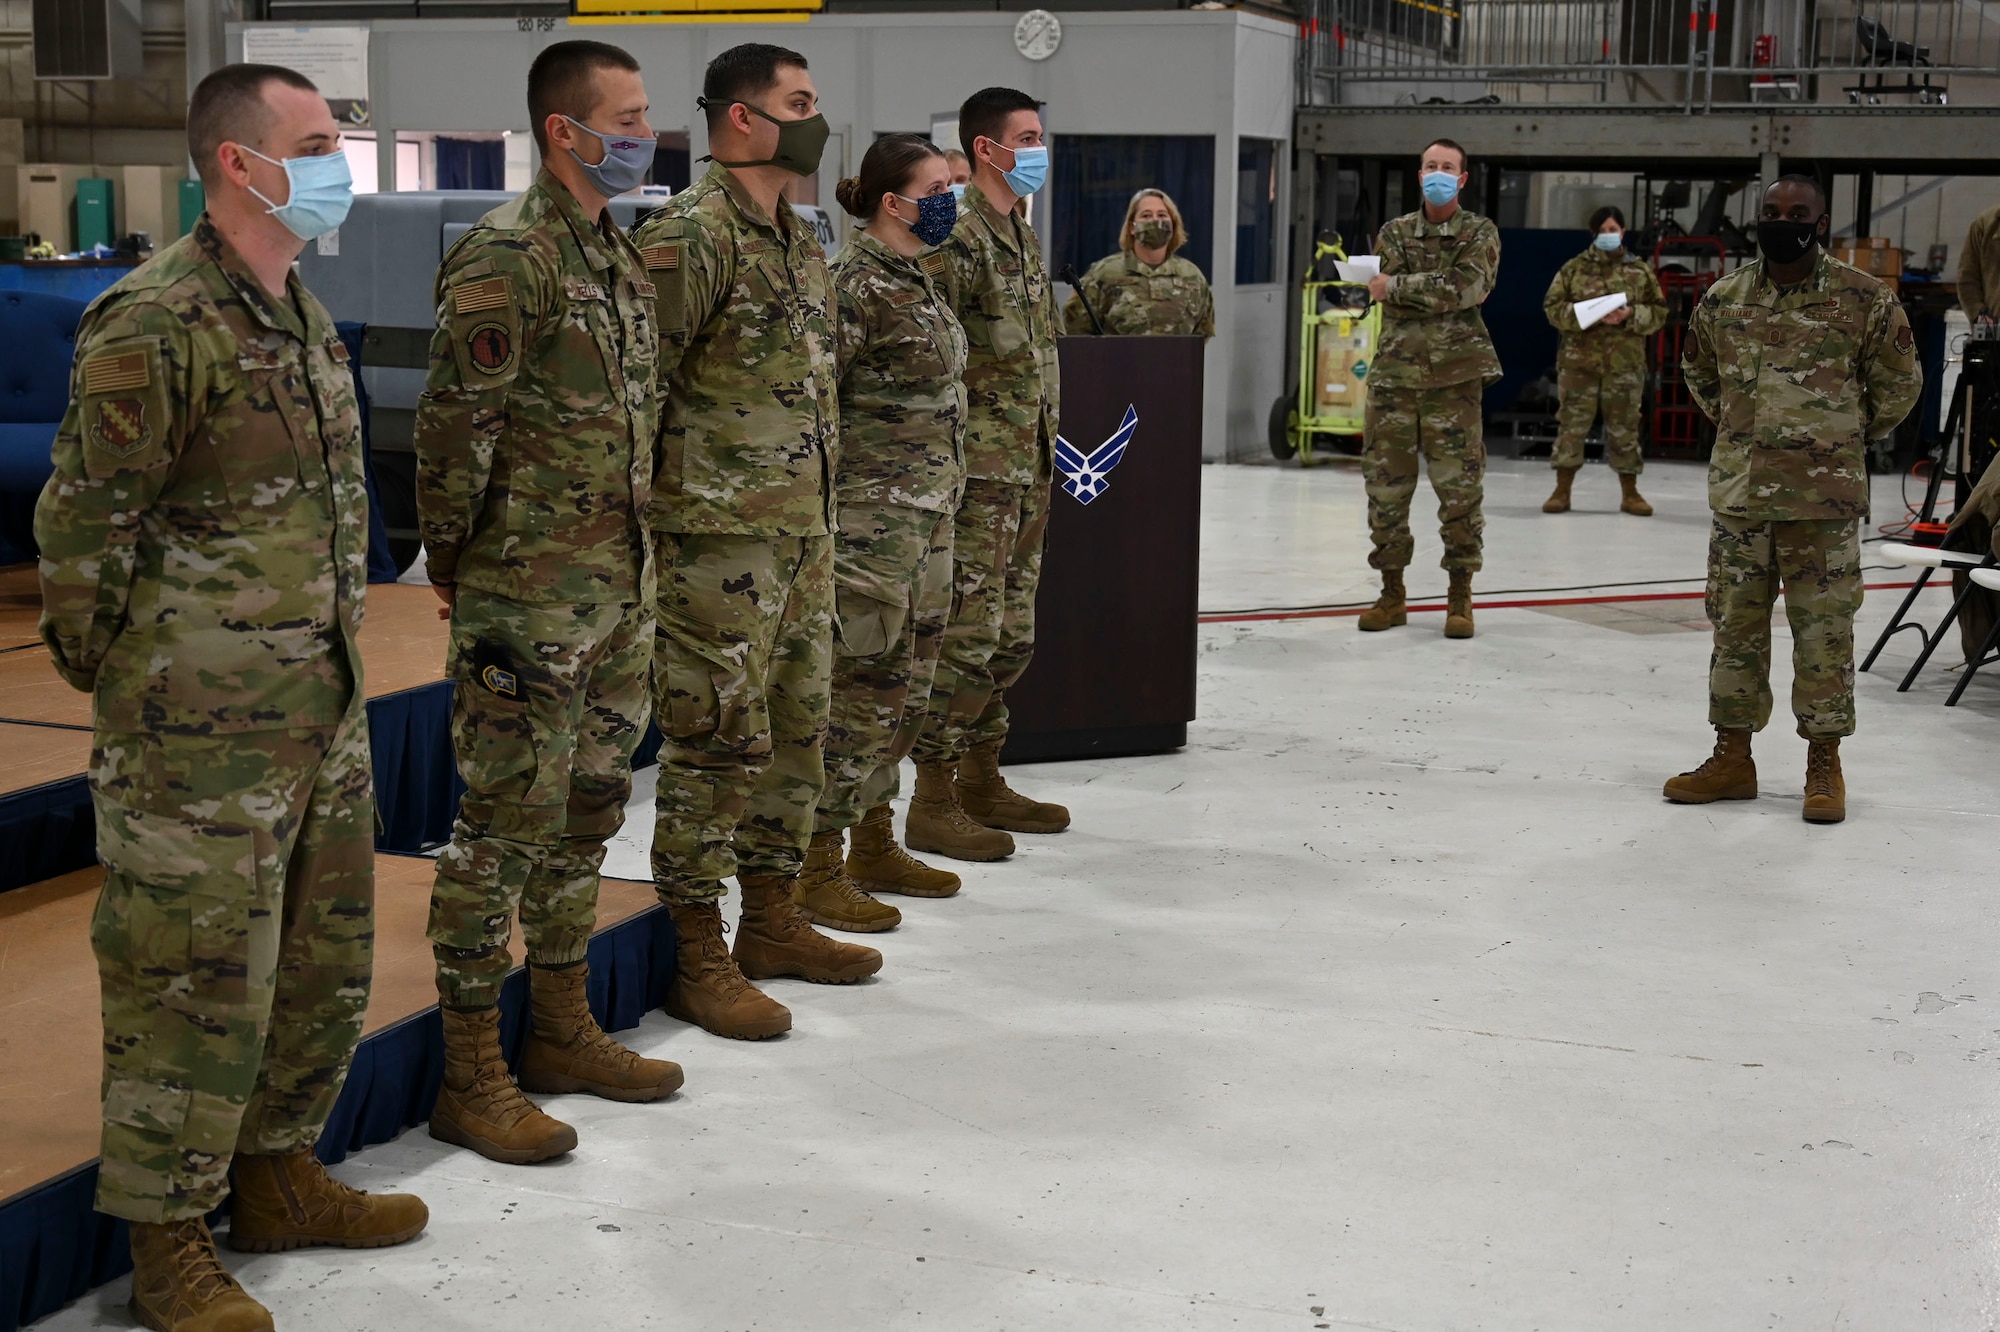 U.S. Air Force Chief Master Sgt. Maurice Williams, command chief master sergeant of the Air National Guard, recognizes star performers of the 126th Air Refueling Wing at an enlisted all-call during his visit to the wing at Scott Air Force Base, Illinois, Oct. 27, 2020.